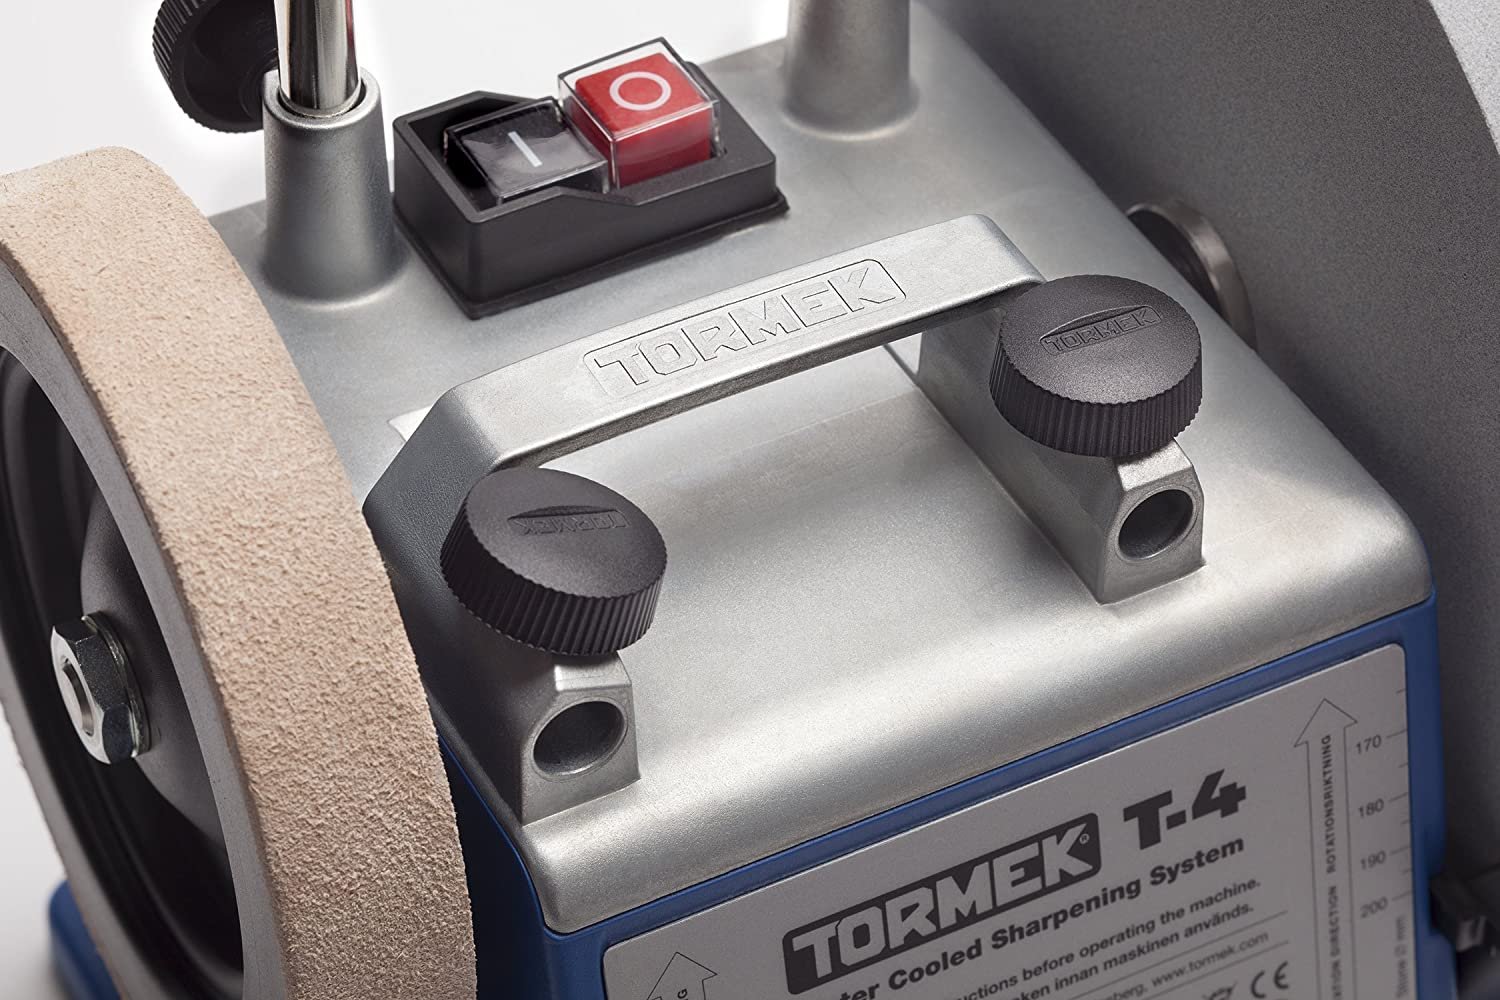 Tormek T-8 Grinding Machine - Water Cooled Sharpening System